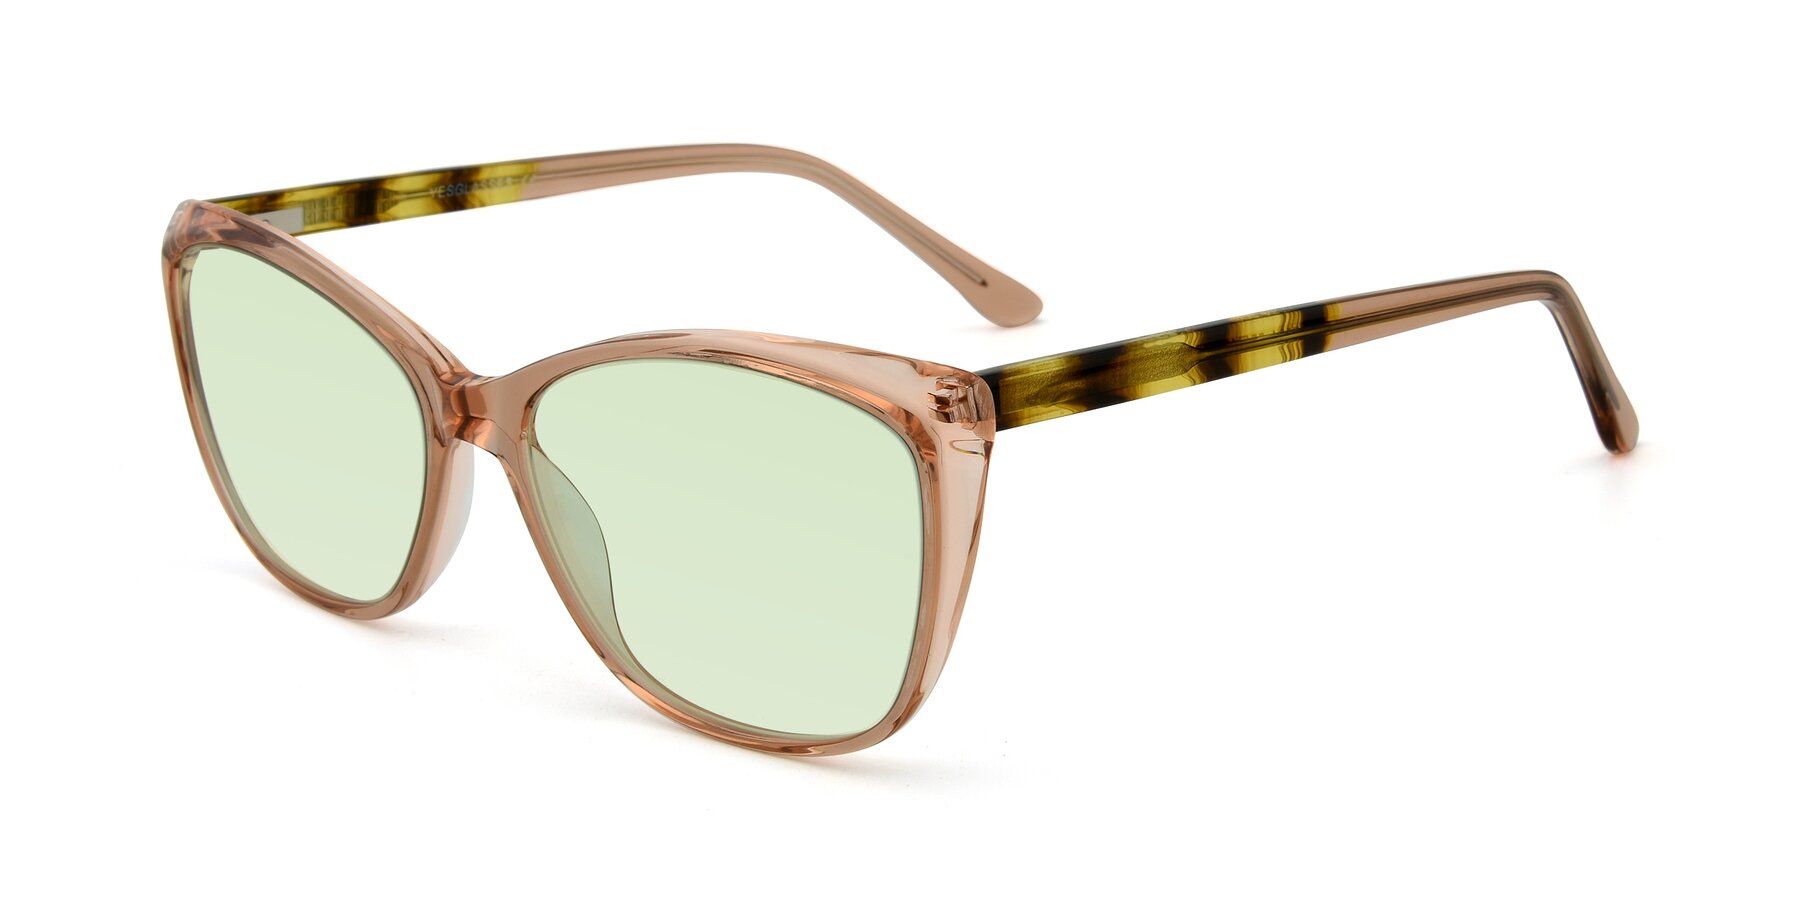 Angle of 17384 in Transparent Caramel with Light Green Tinted Lenses